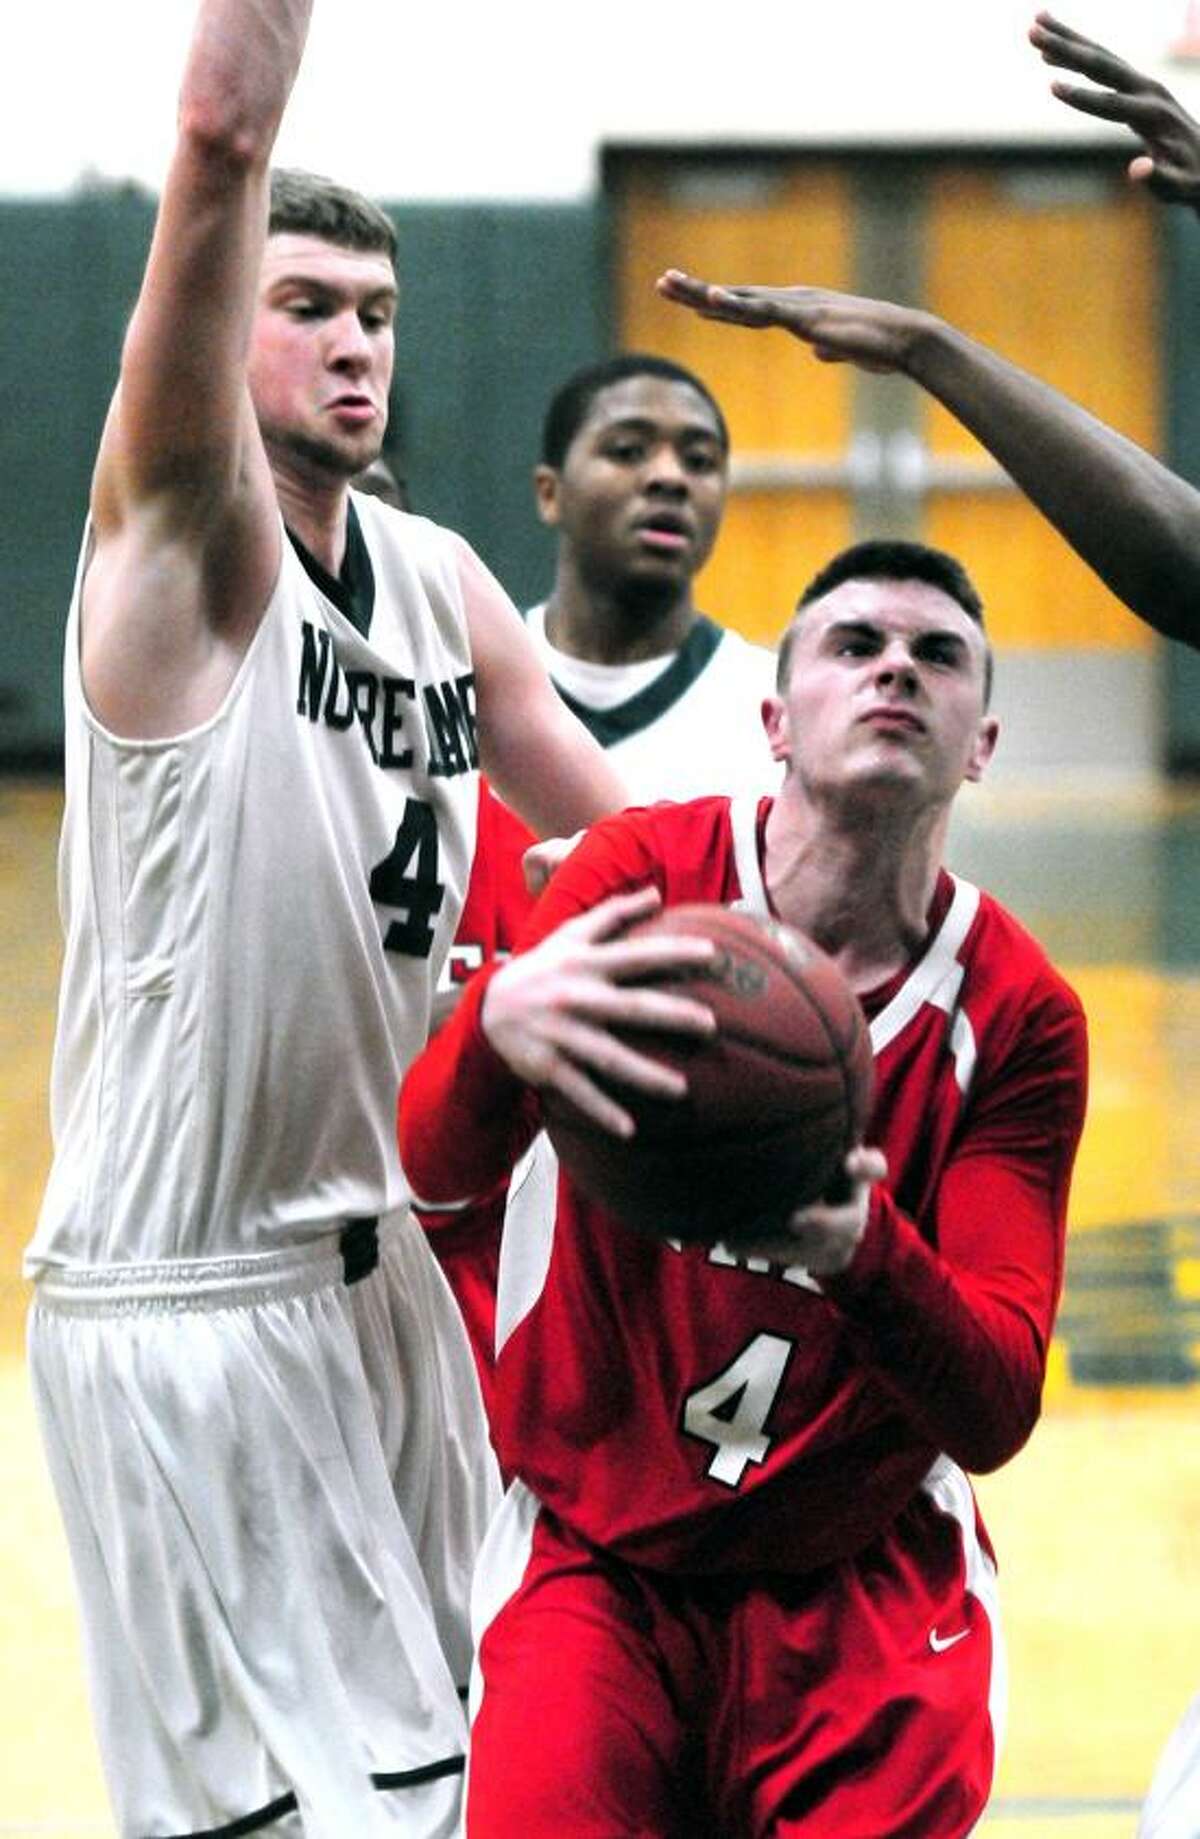 Ryan Murphy, right, of Fairfield Prep drives past Joseph Bongiorni from Notre Dame of West Haven. Murphy had 18 points in Prep's 74-57 win. Photo by Arnold Gold/New Haven Register.